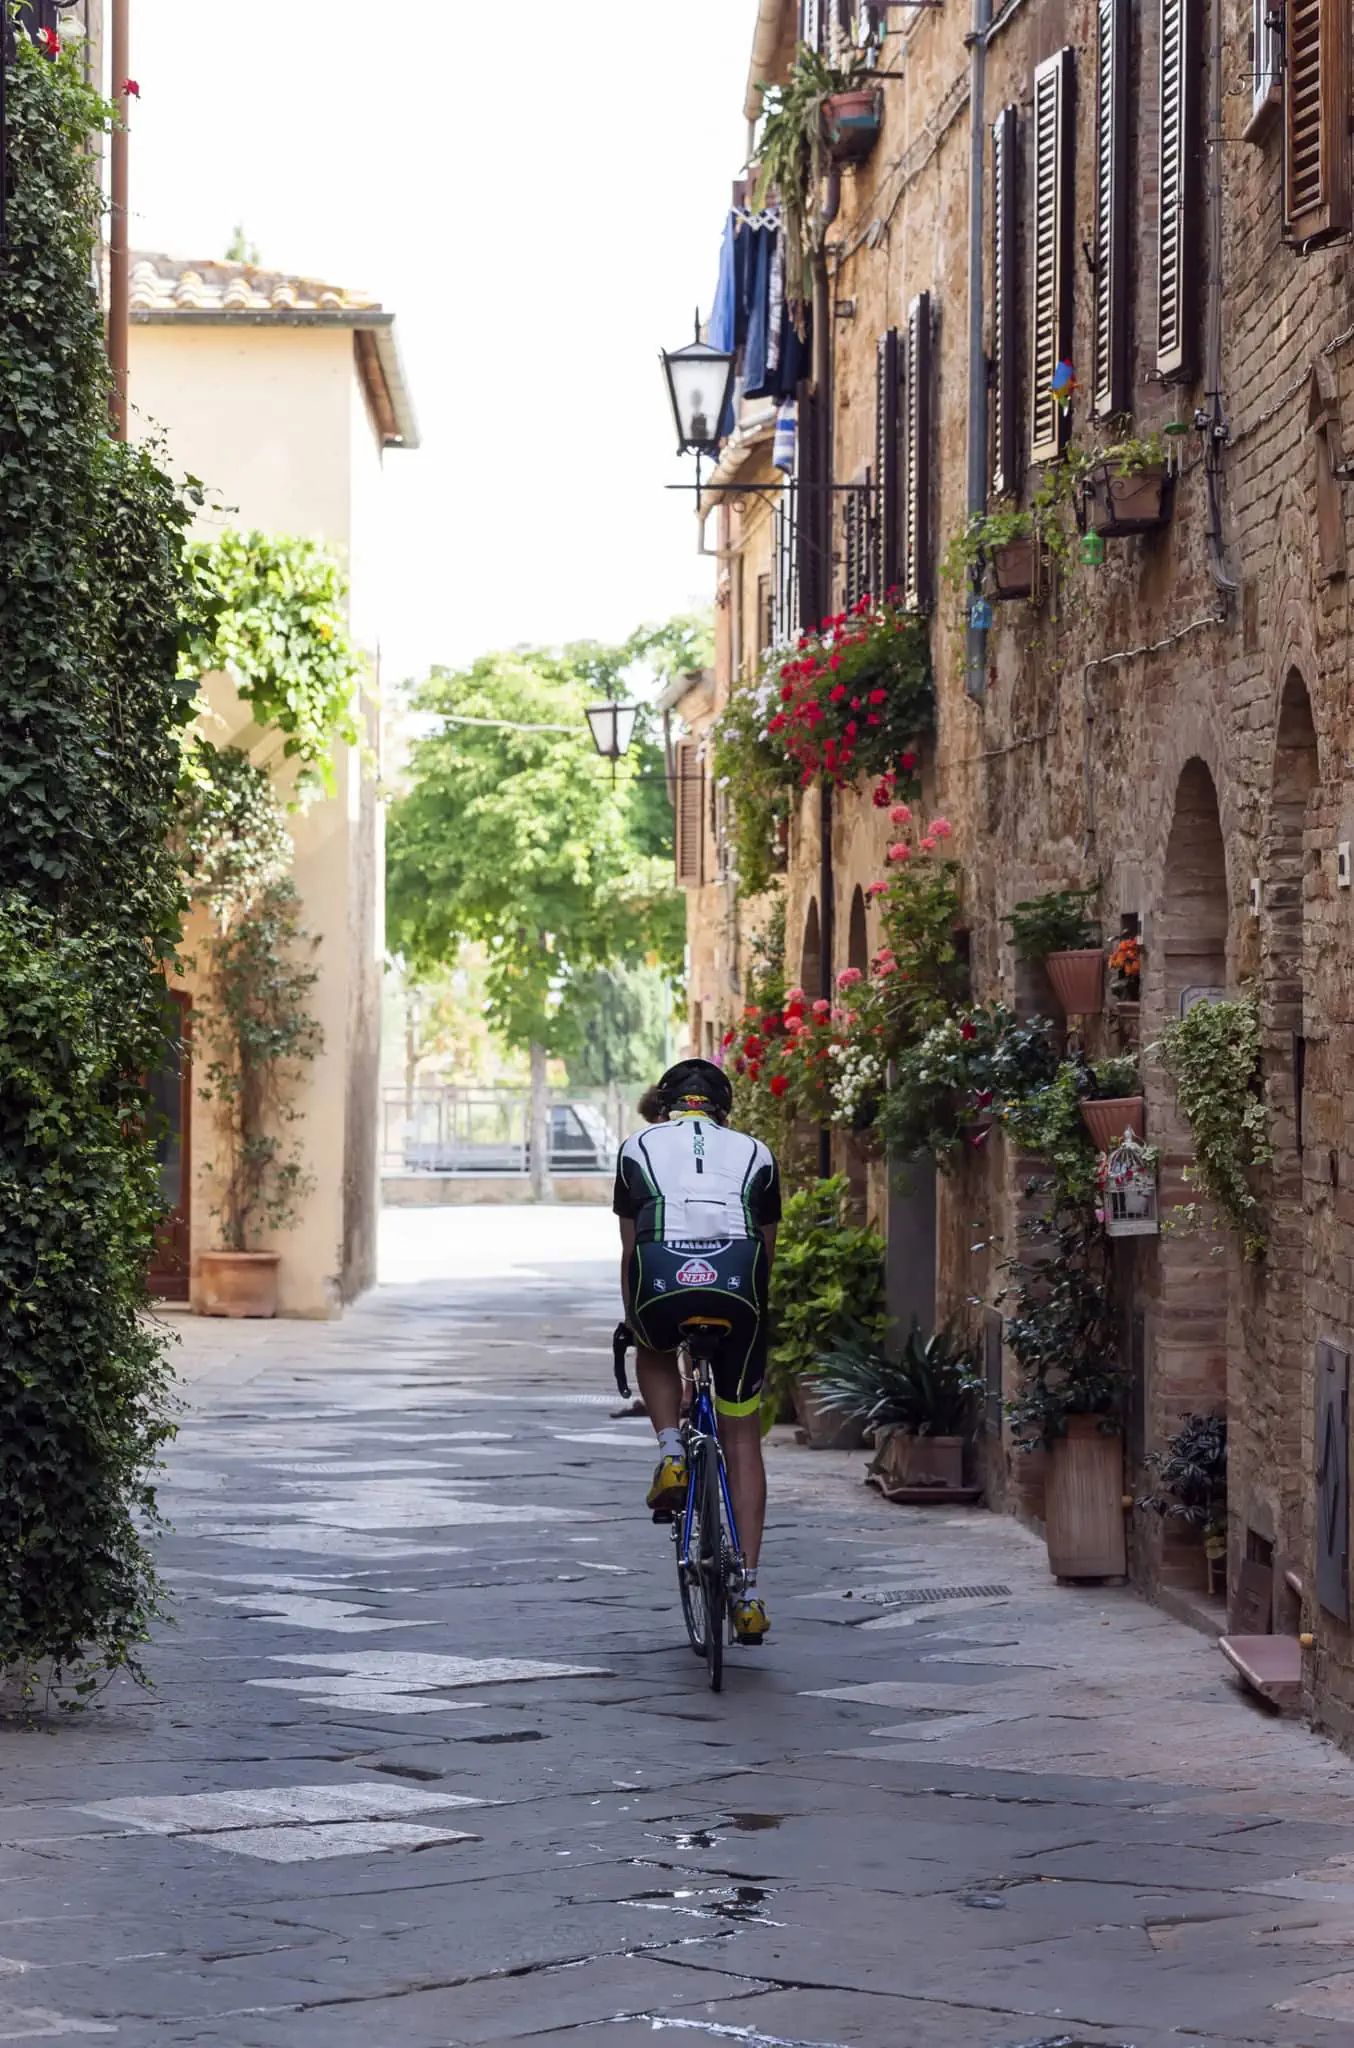 On a cycling tour in Tuscany Italy